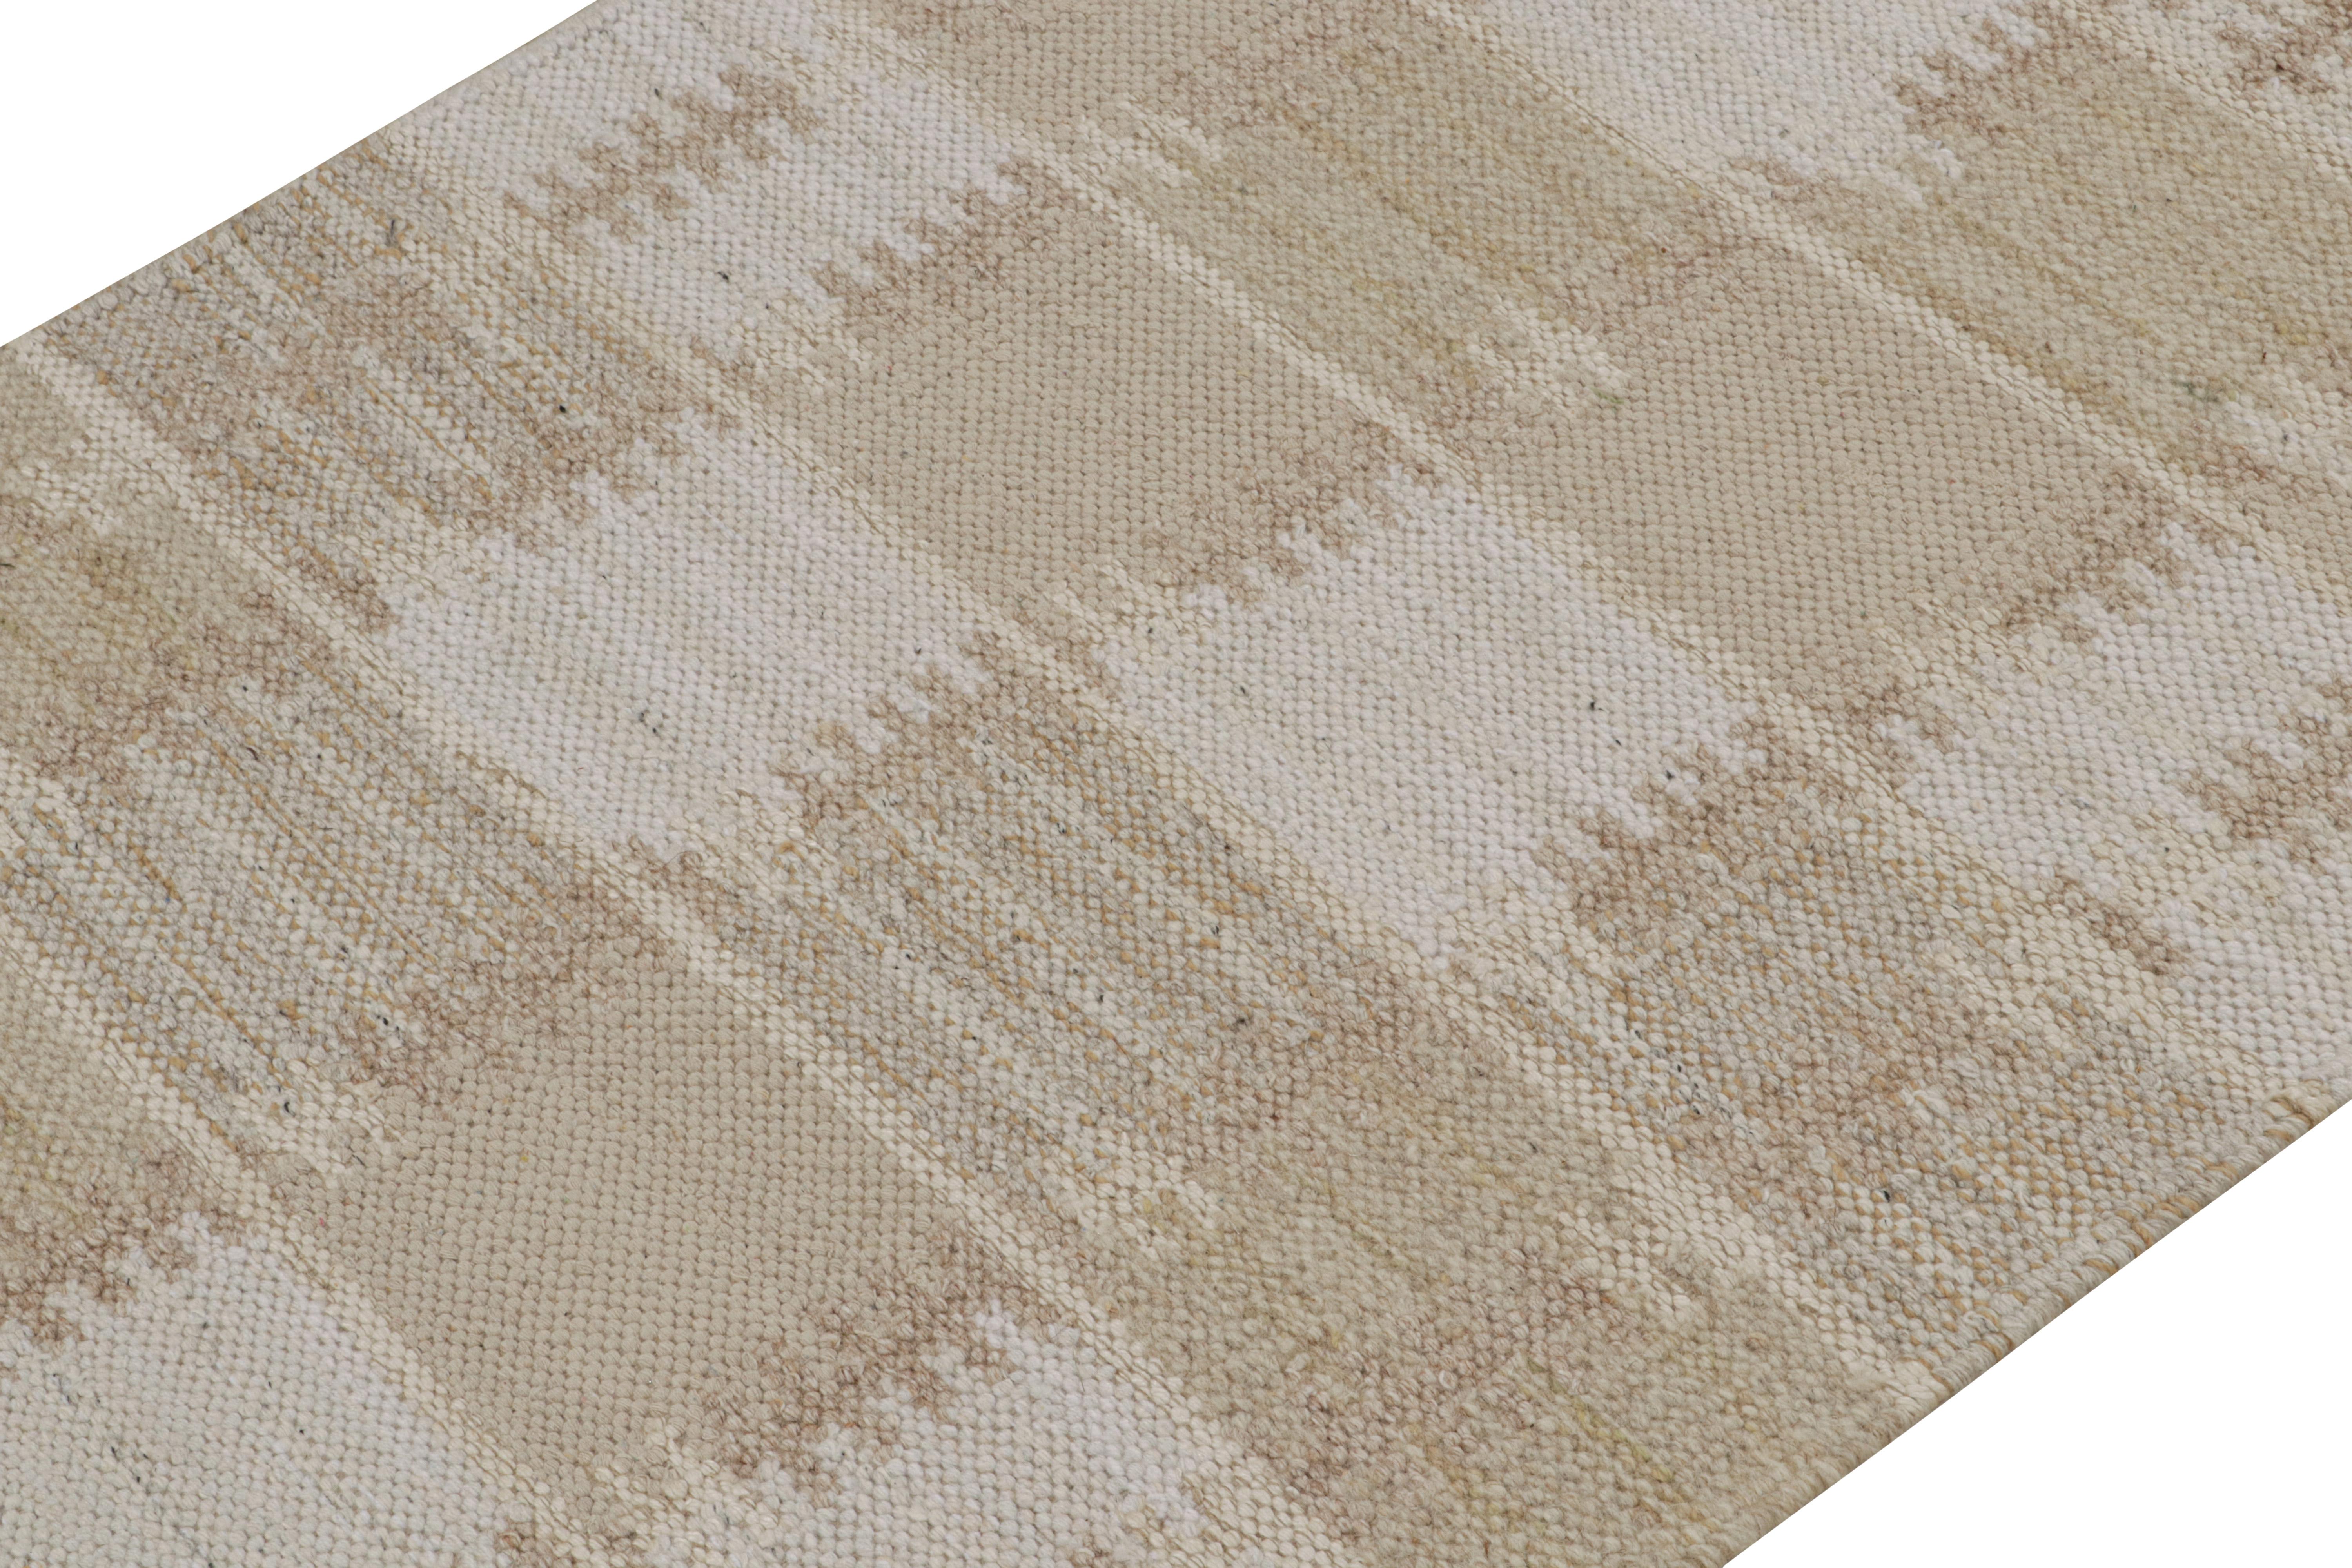 Indian Rug & Kilim’s Scandinavian Style Kilim in White & Brown Patterns For Sale